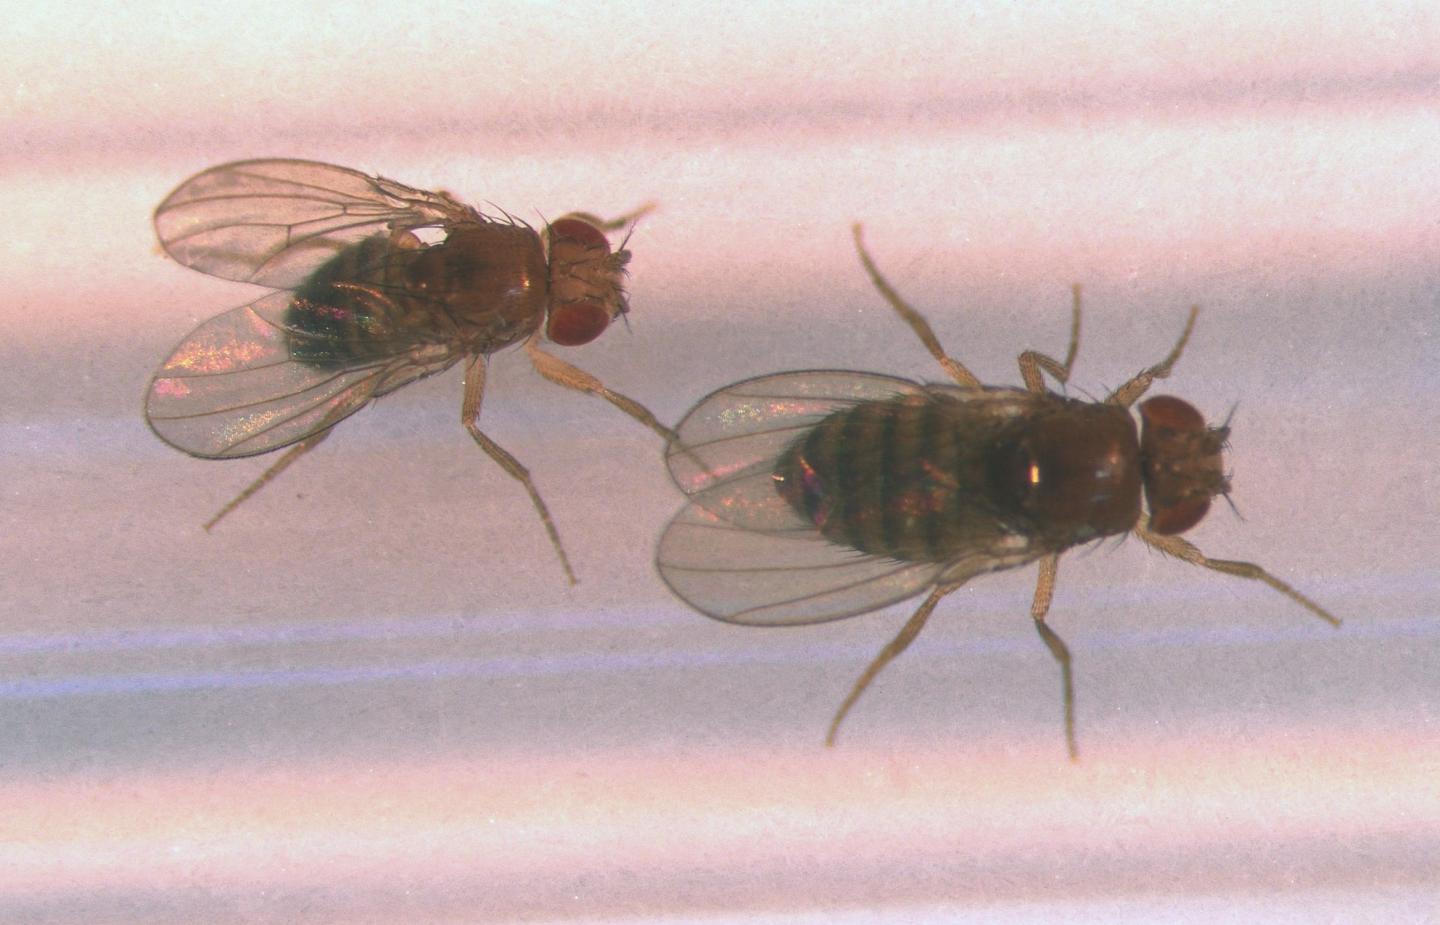 Male Fruit Flies Can Smell a Good Mate Based on Her Metabolism